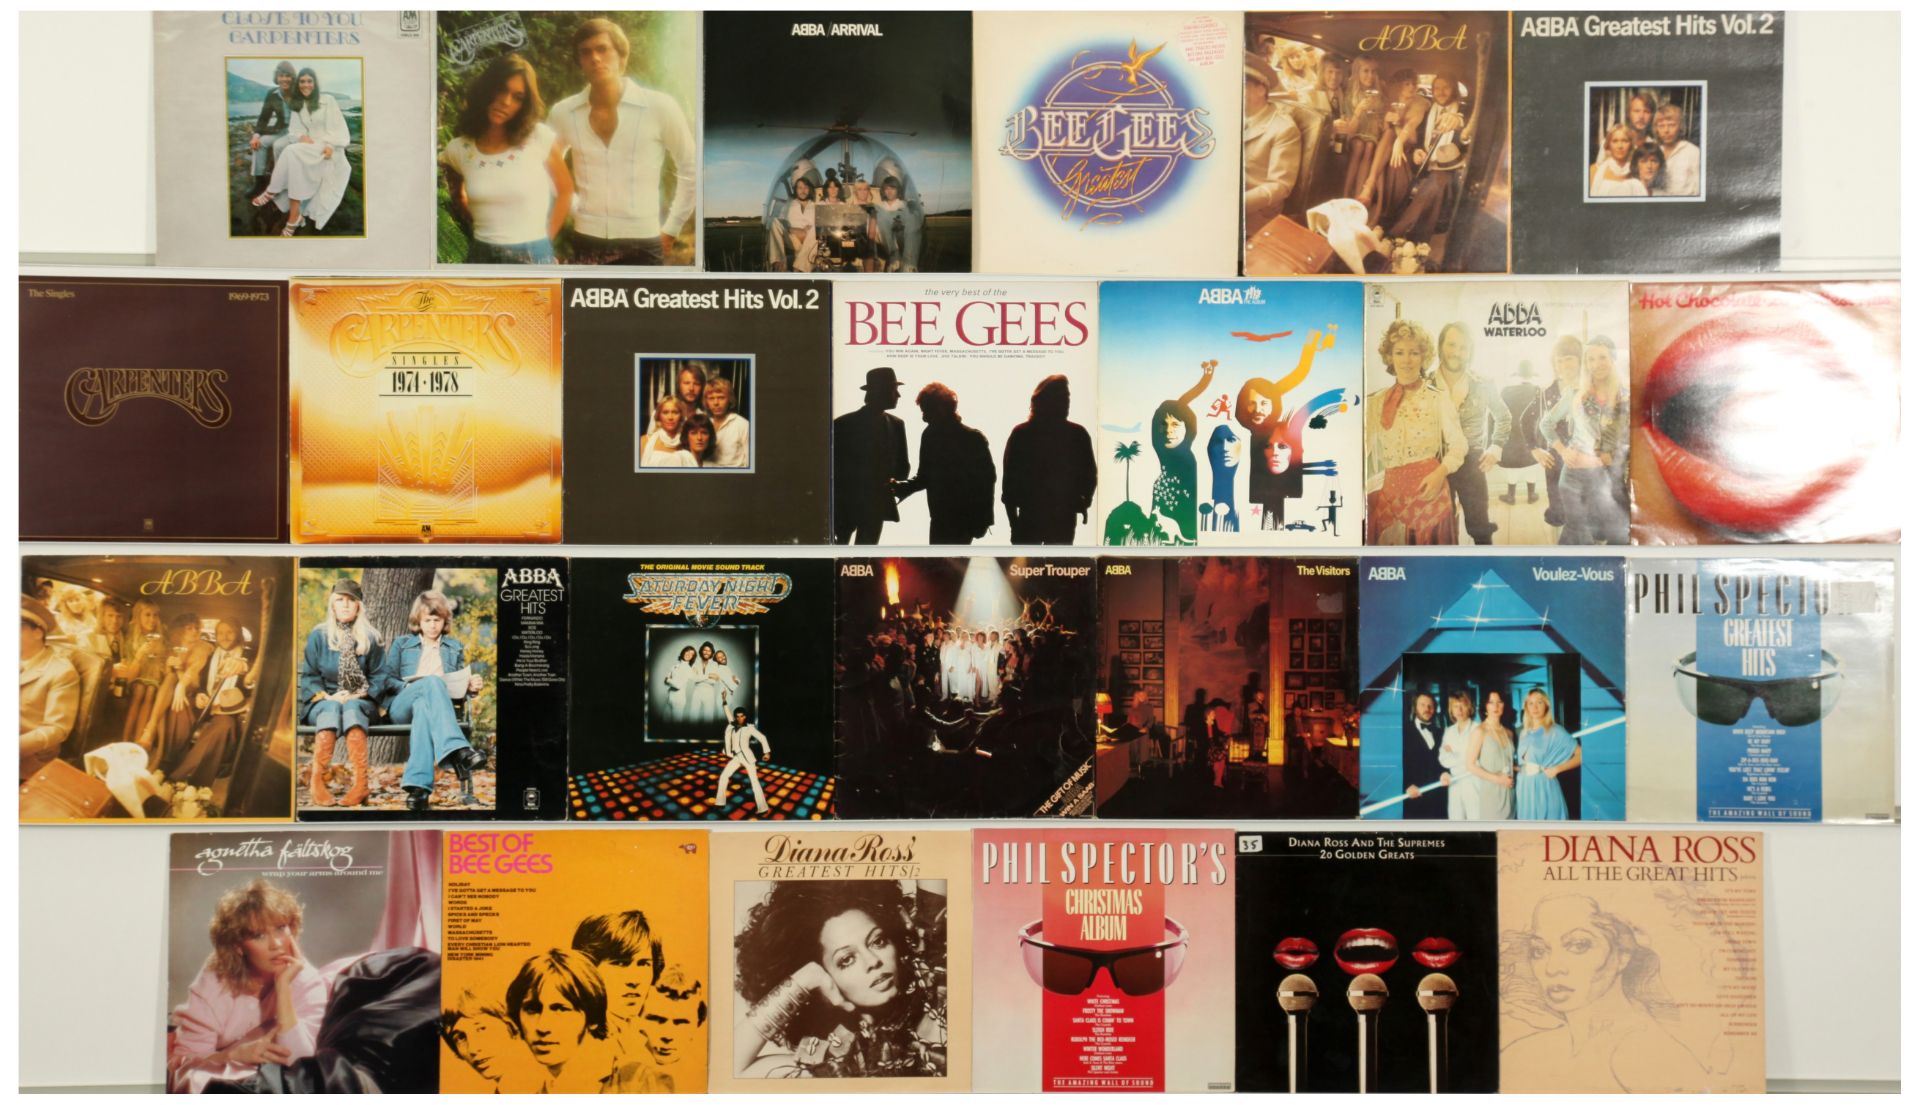 70's Pop and R&B/Soul LPs